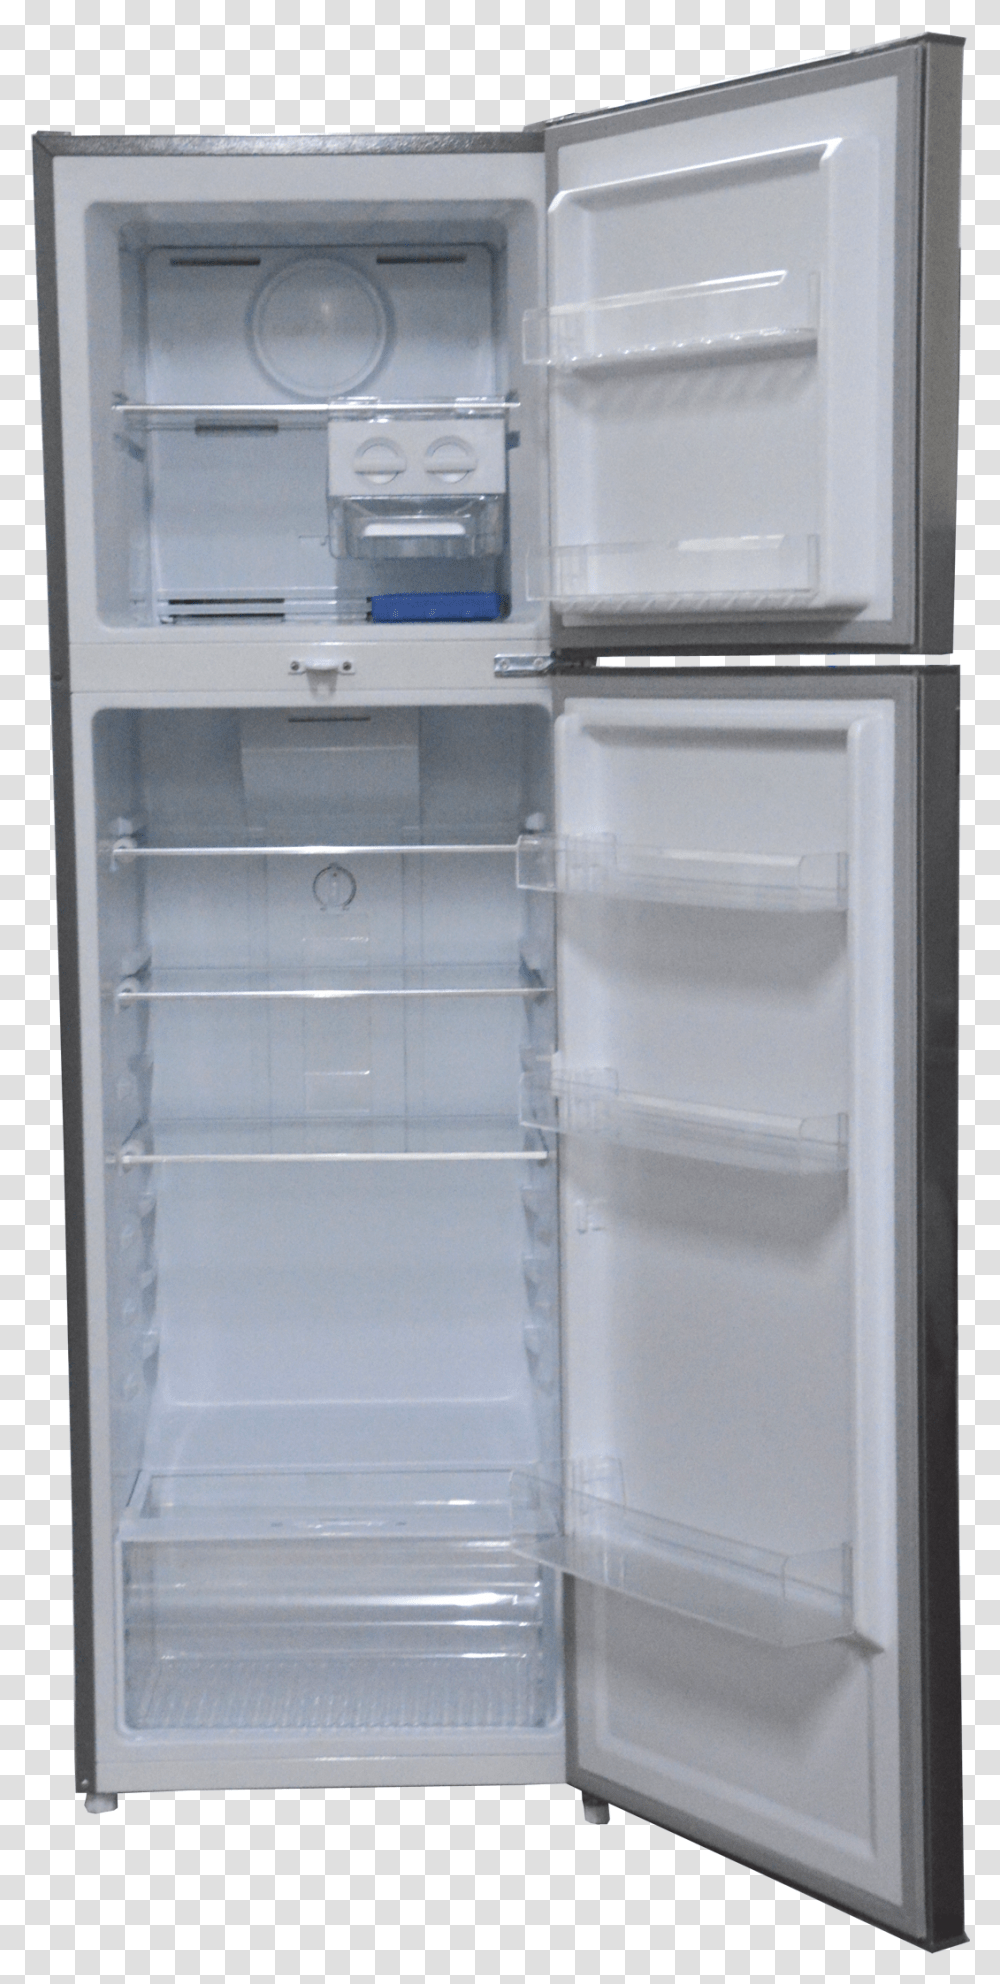 No Frost Refrigerator 251l Double Door Brush Stainless Refrigerator, Appliance Transparent Png